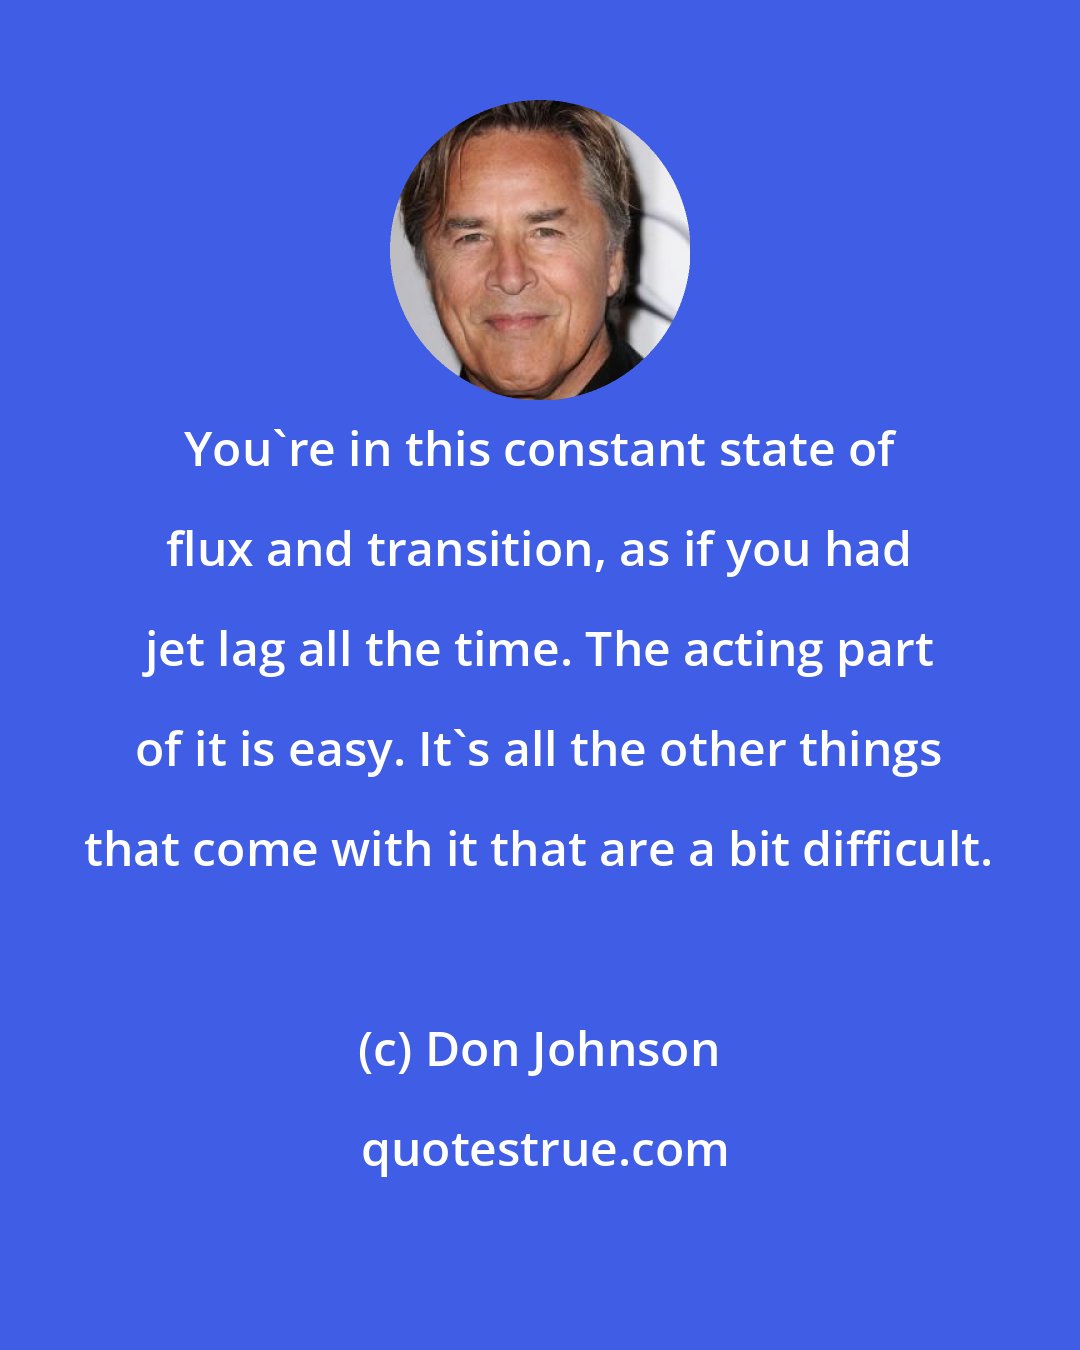 Don Johnson: You're in this constant state of flux and transition, as if you had jet lag all the time. The acting part of it is easy. It's all the other things that come with it that are a bit difficult.